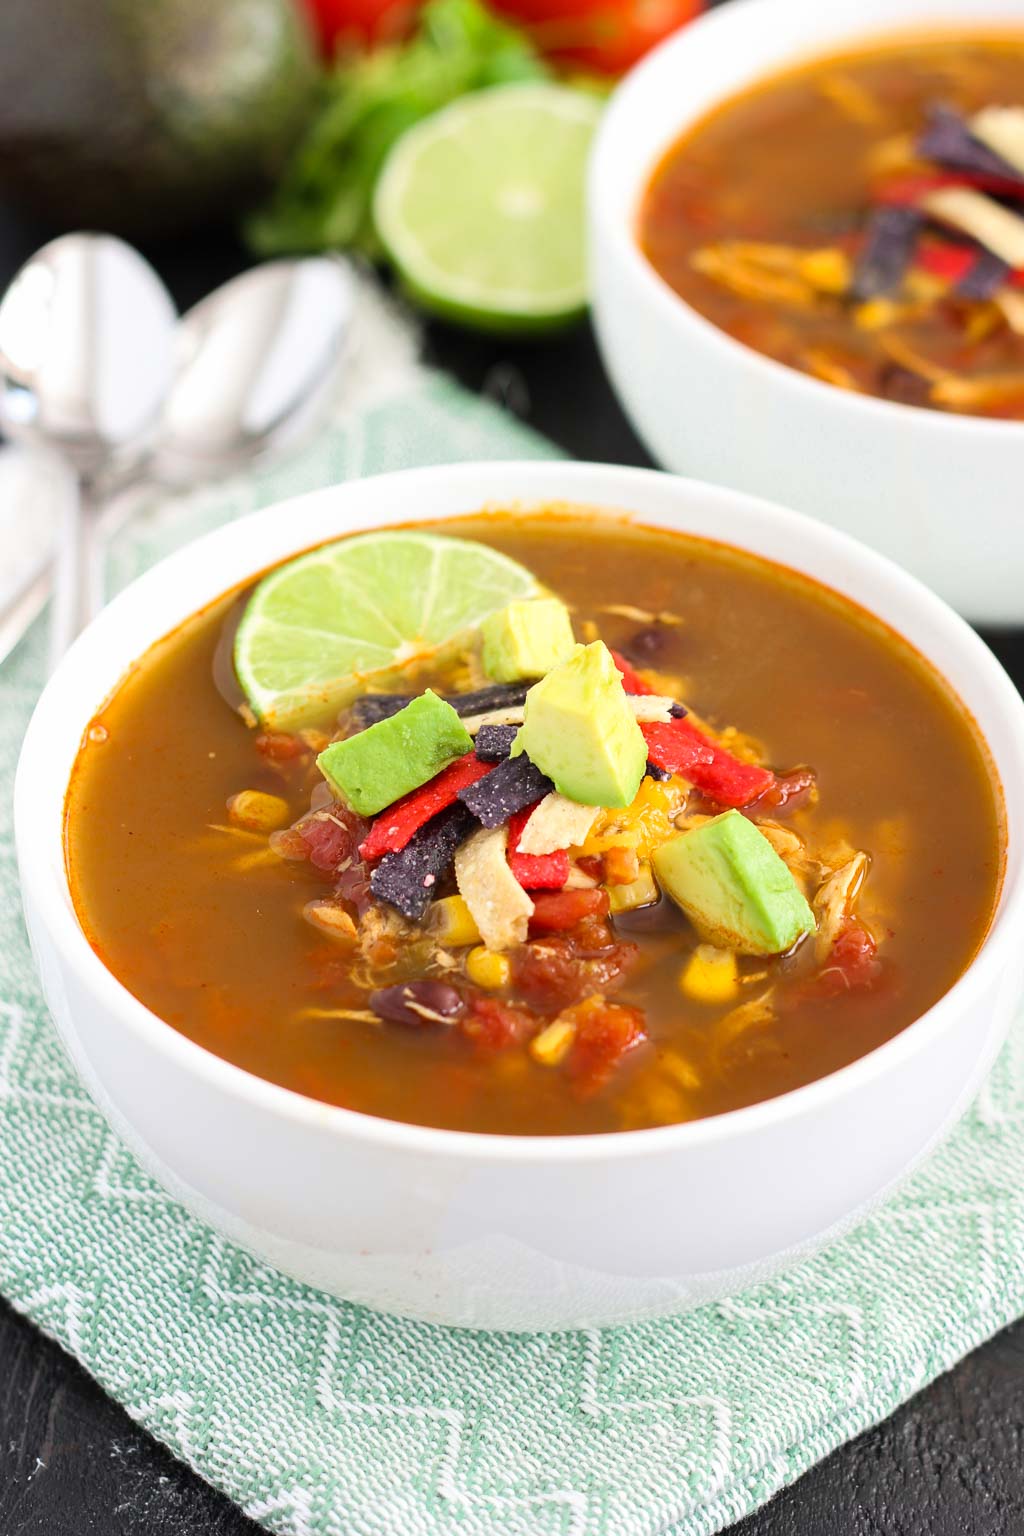 This Slow Cooker Chicken Tortilla Soup is filled with tender chicken, diced tomatoes, corn, black beans, and a combination of spices. With hardly any prep work involved, this flavorful meal will quickly become a household favorite!